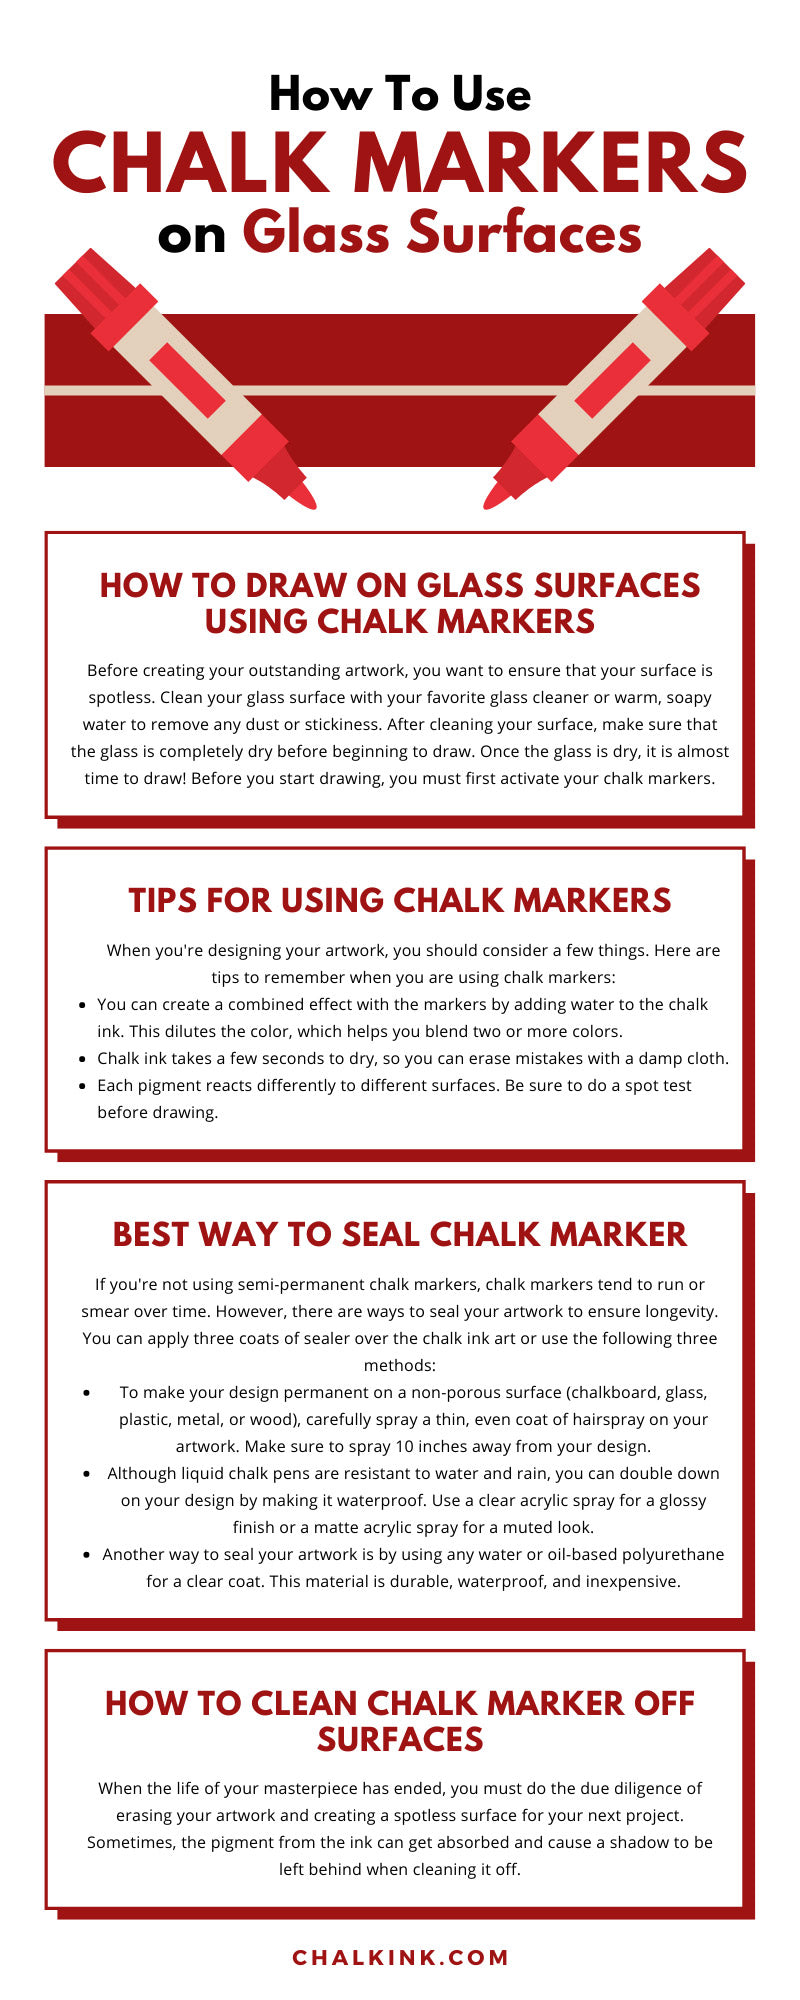 Tips For Working Magic with Chalk Markers - I Still Love You by